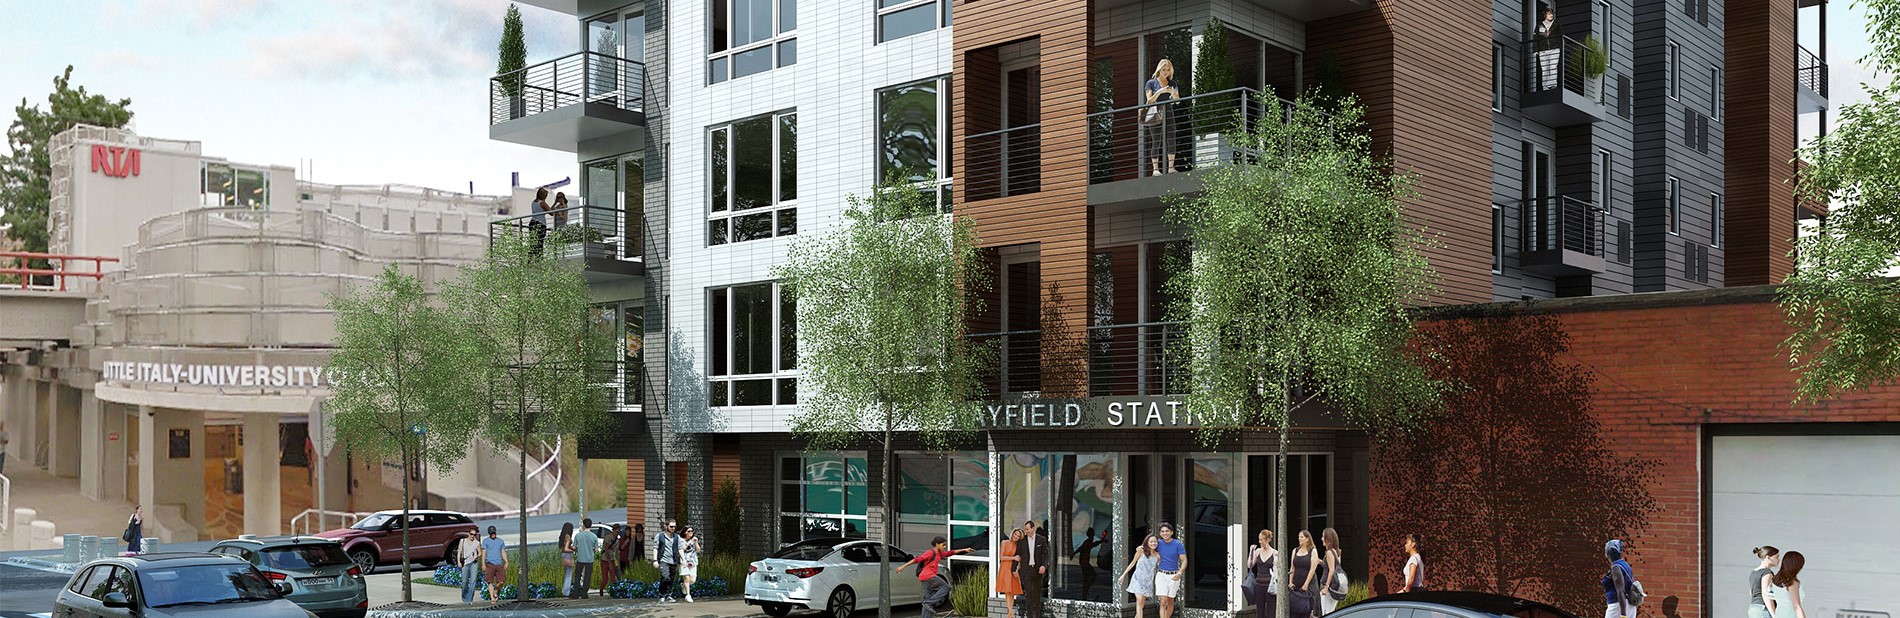 Multi-level apartment exterior at Mayfield Station Apartments